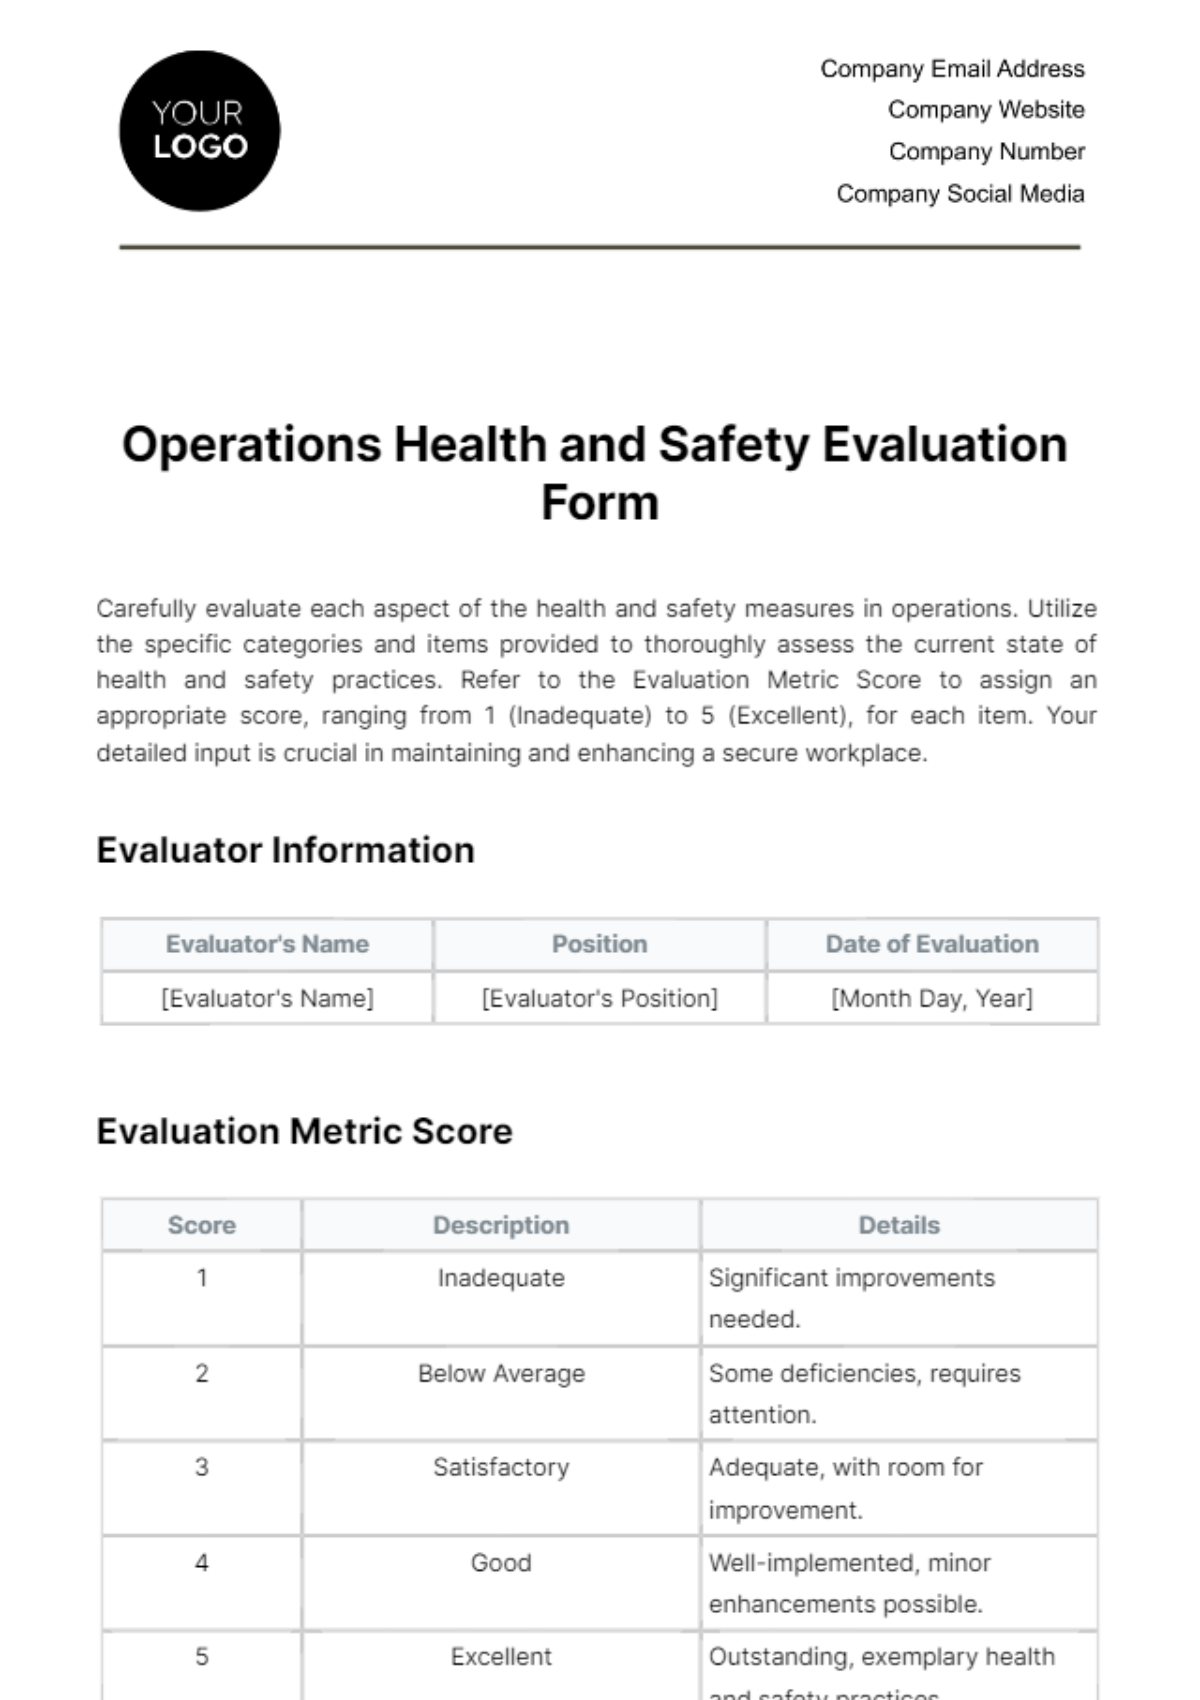 Operations Health and Safety Evaluation Form Template